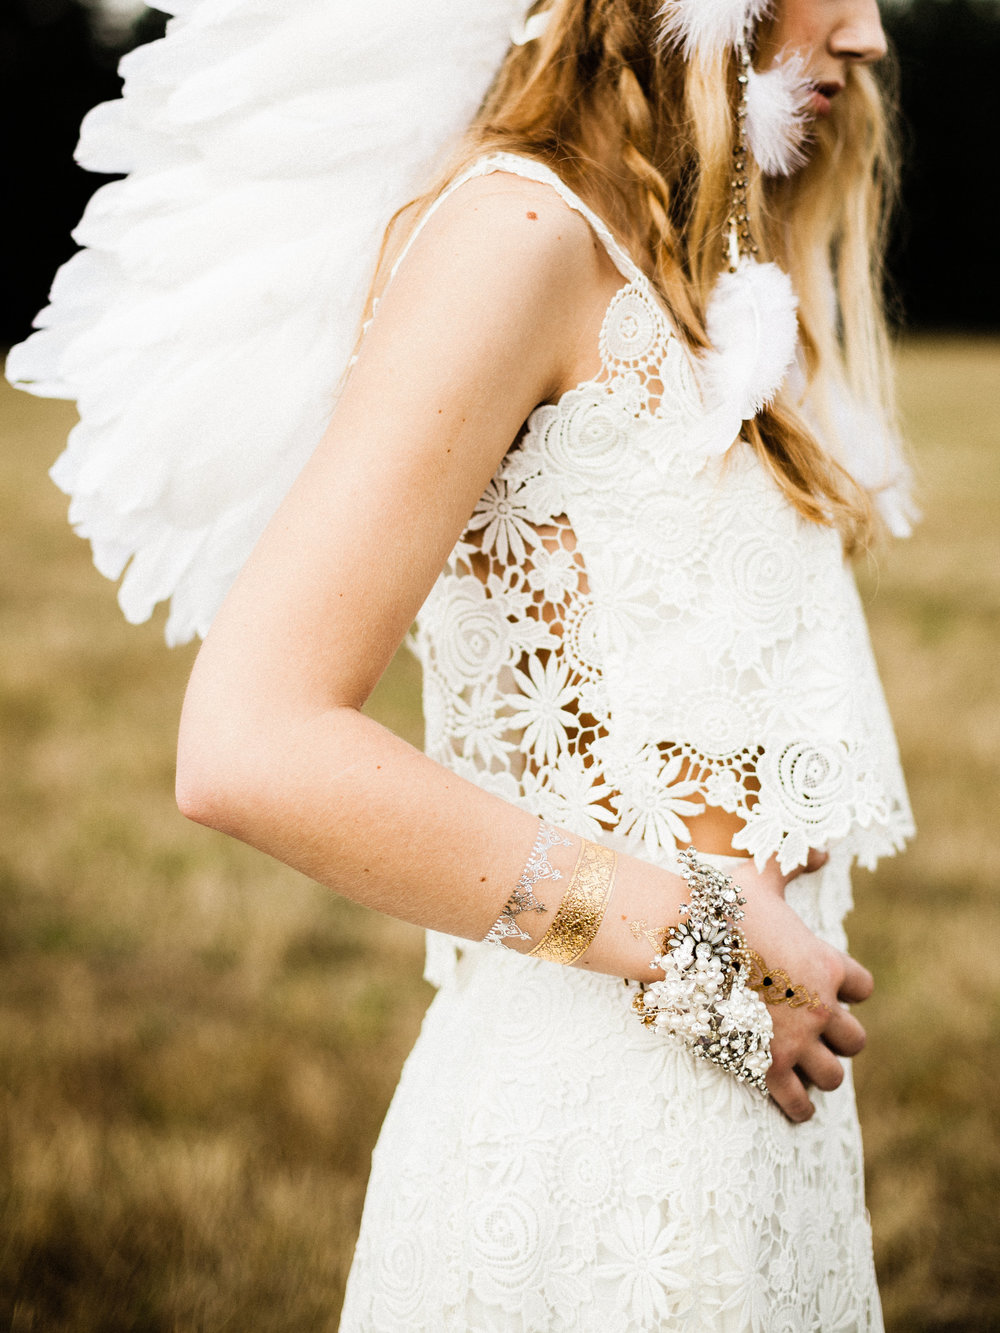 15 Magical Wedding Outfits for All Love's Aesthetics 